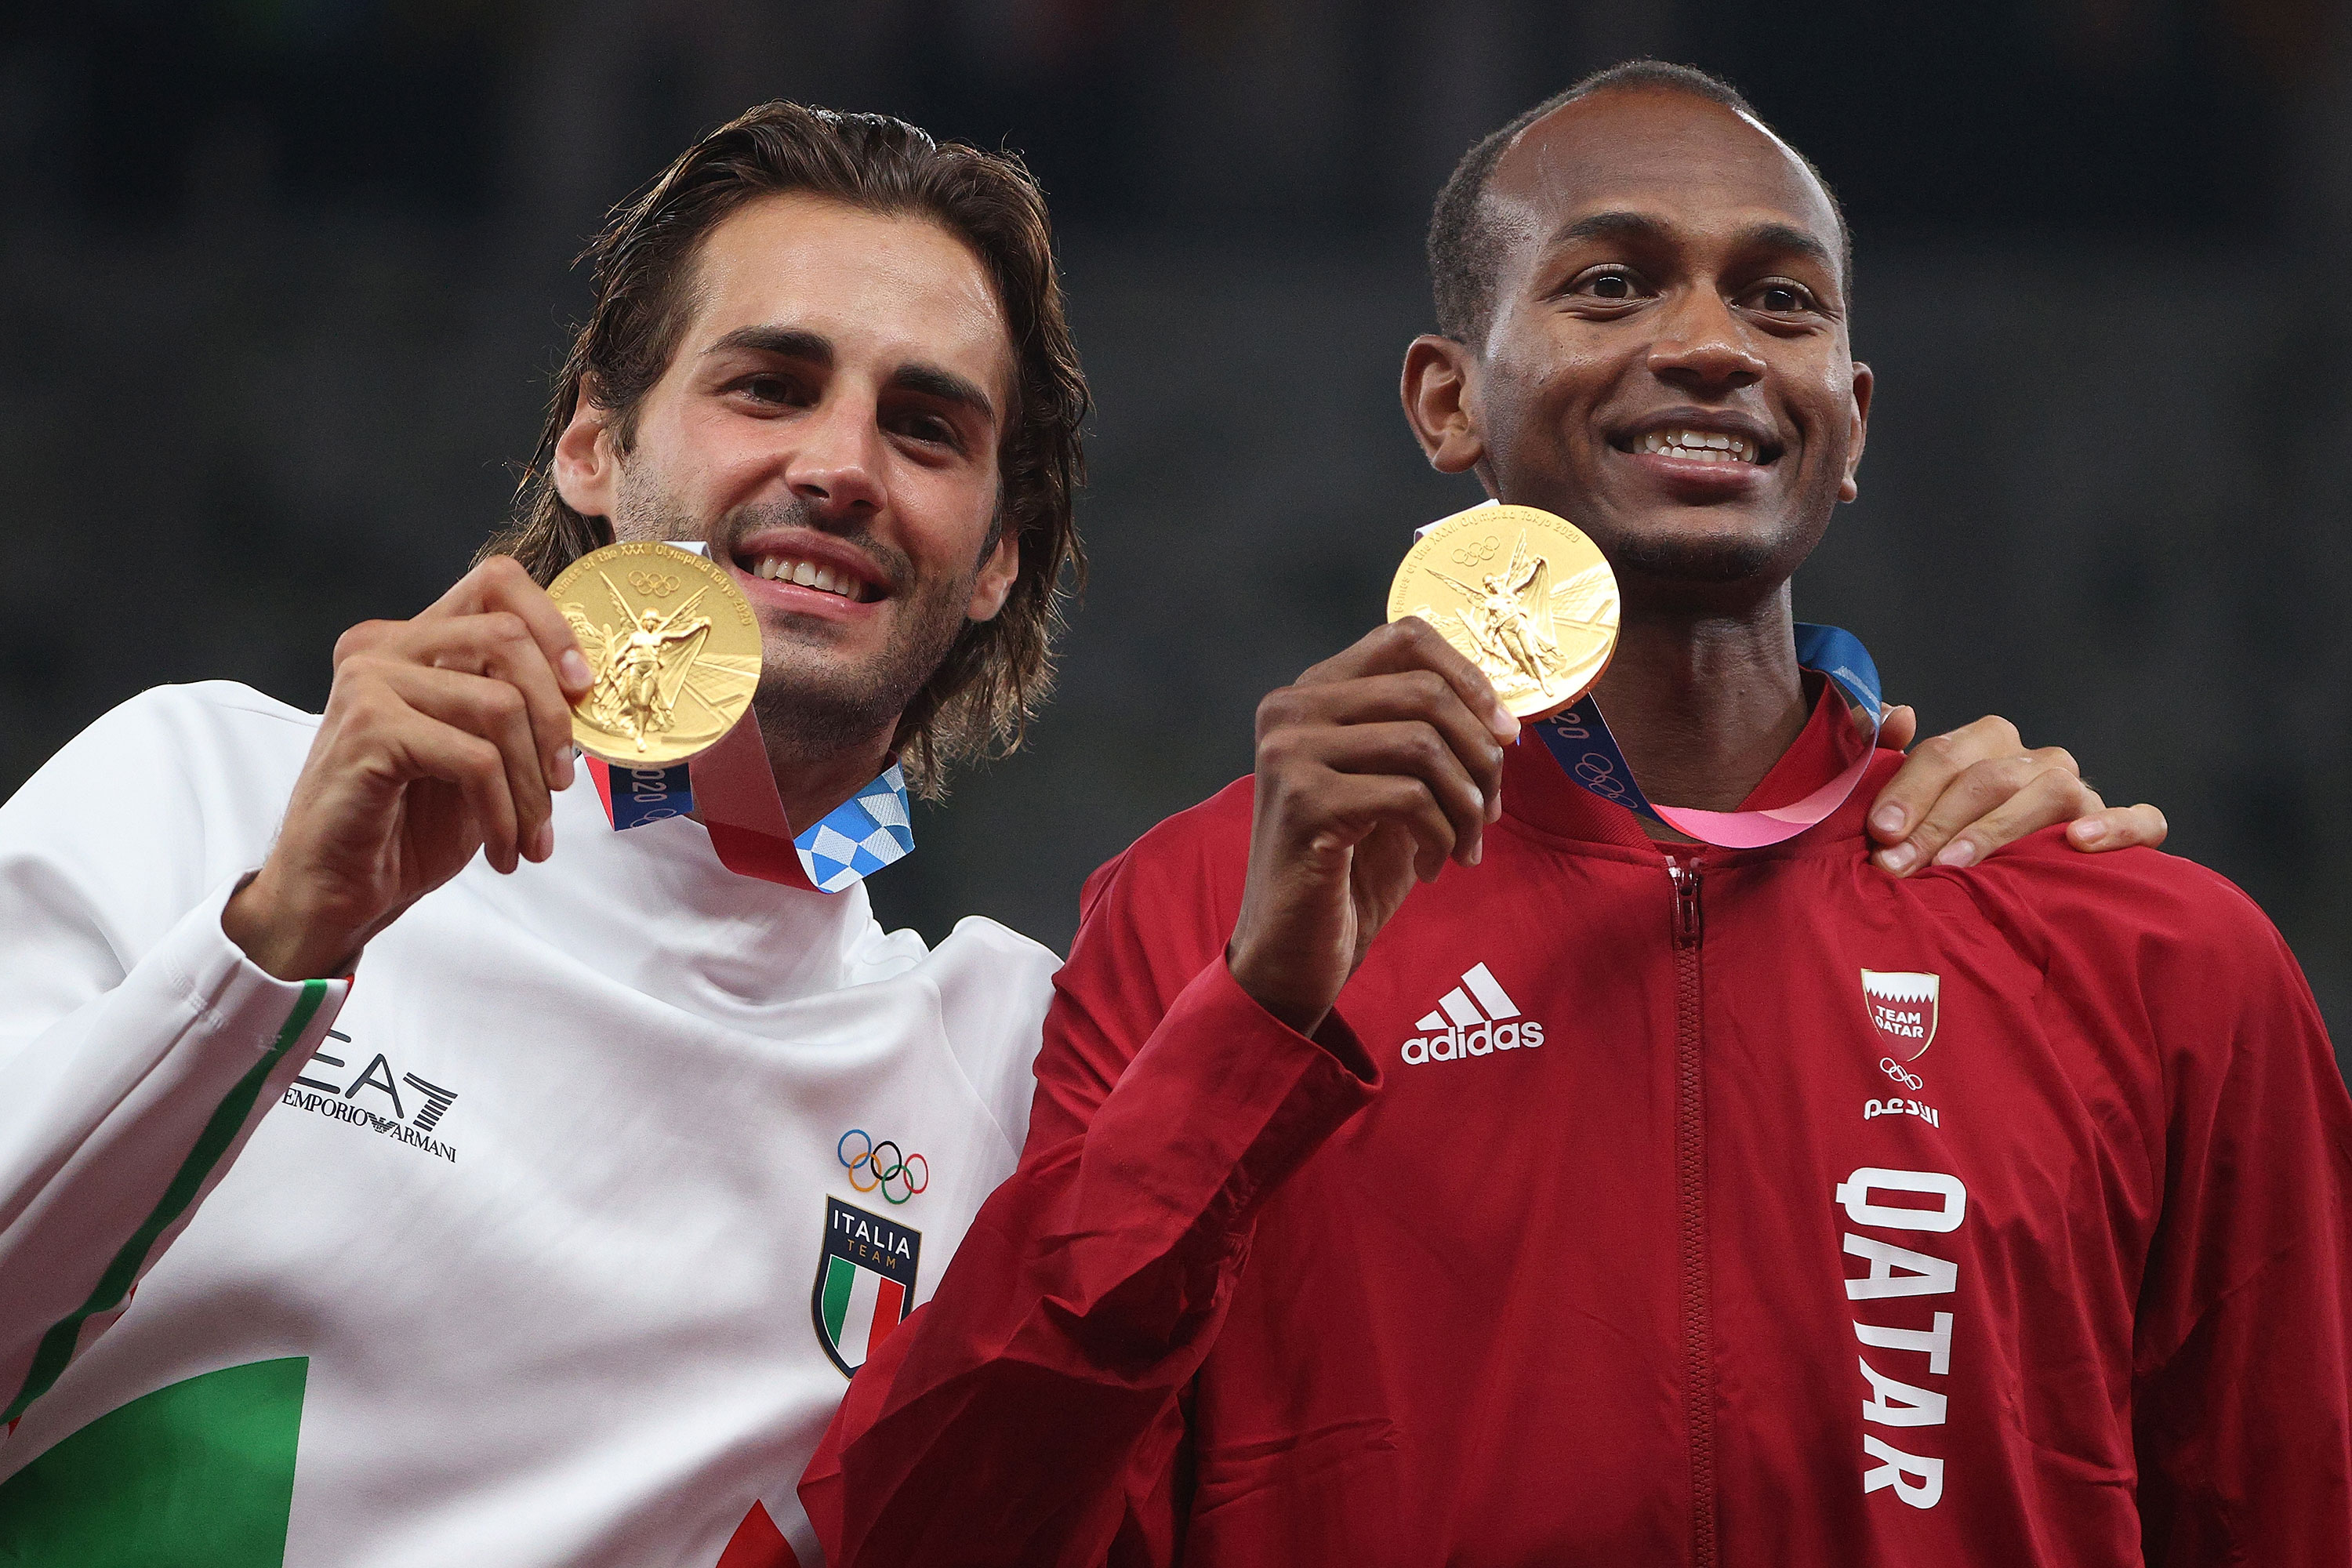 Joint gold medalists Gianmarco Tamberi of Italy and Mutaz Essa Barshim of Qatar celebrate on the podium together on August 2.